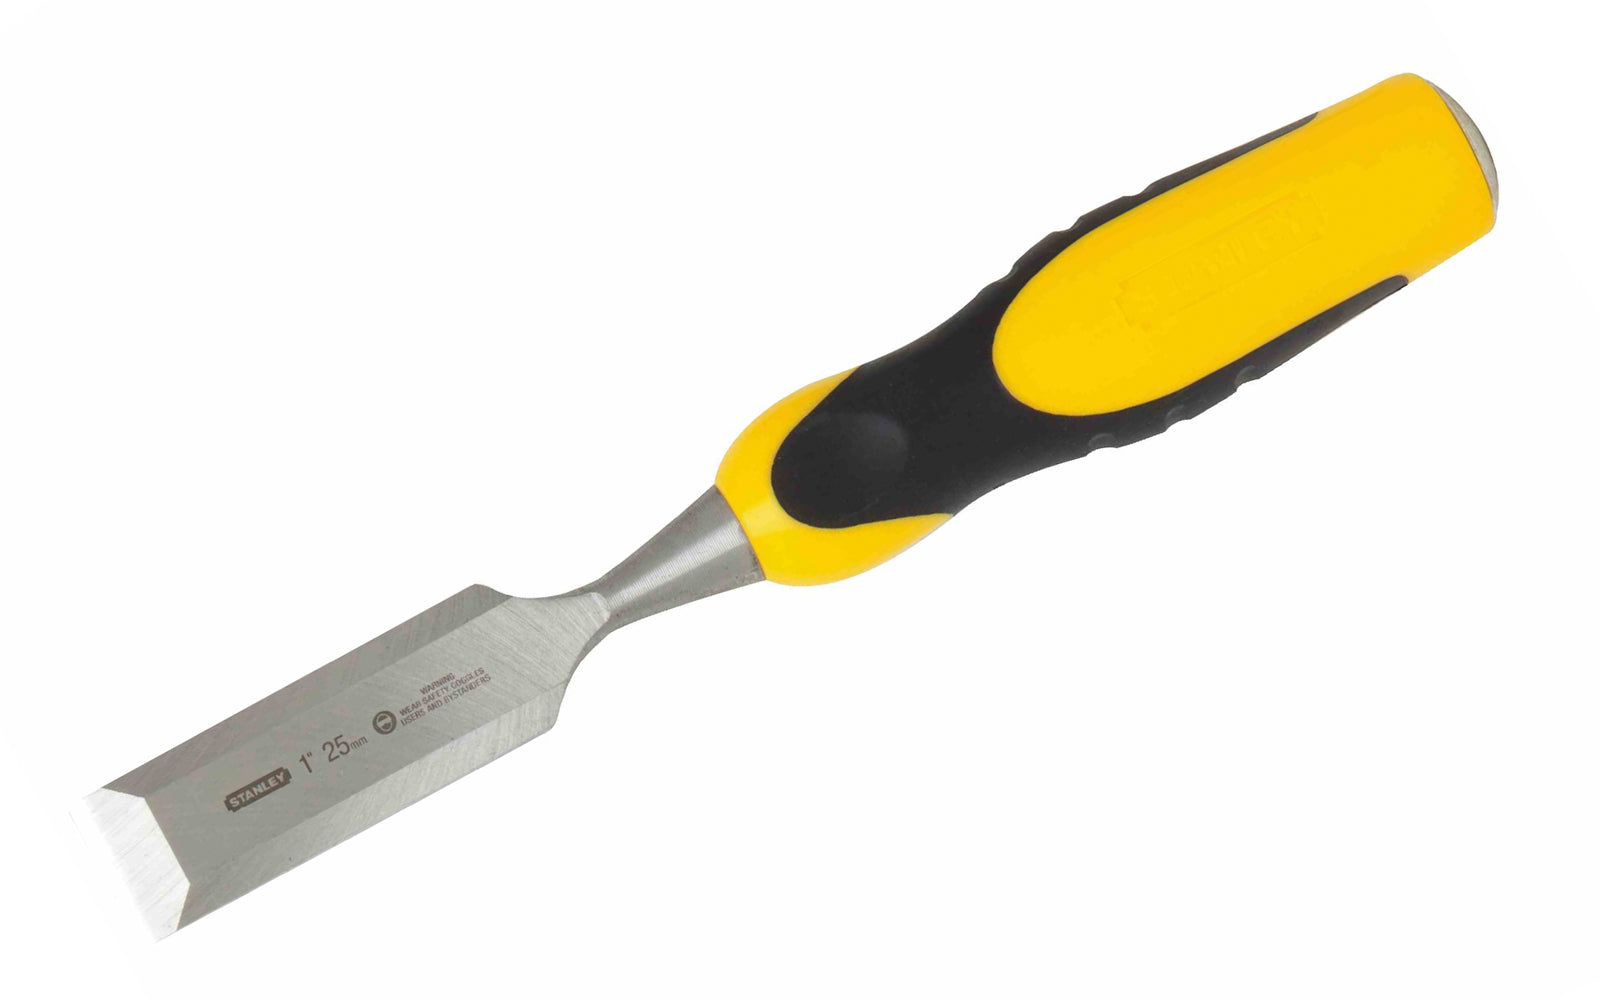 Stanley 1" (25 mm) Wood Chisel ~ 16-316 - High-carbon chrome steel - hardened & tempered